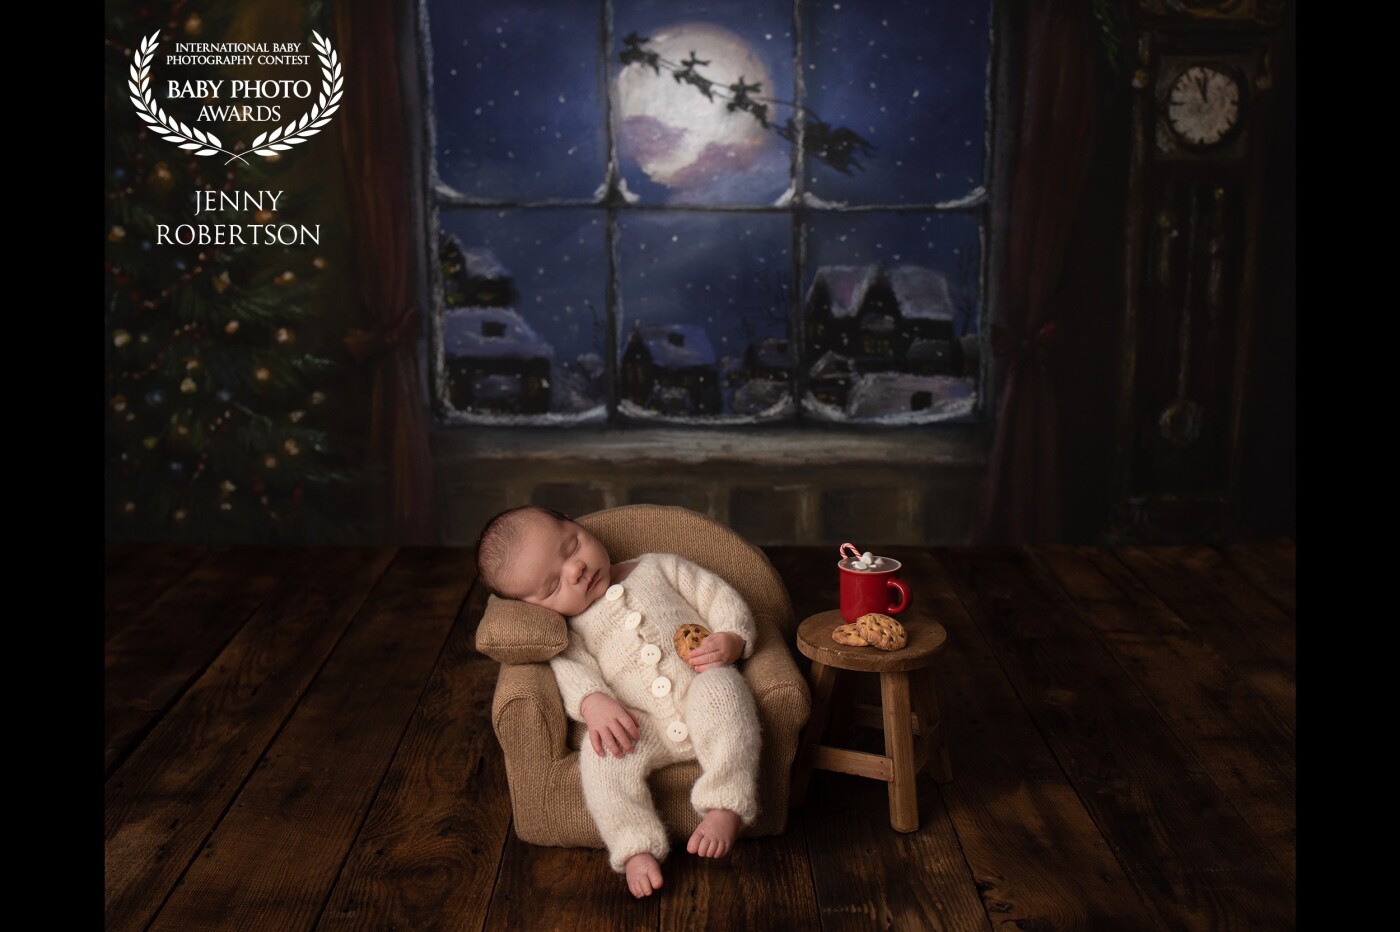 "Waiting for Santa"<br />
This photo is special to me since this is my newest nephew. His brother was the first baby I photographed 3 years ago. I love how this image captures the magic of Christmas.